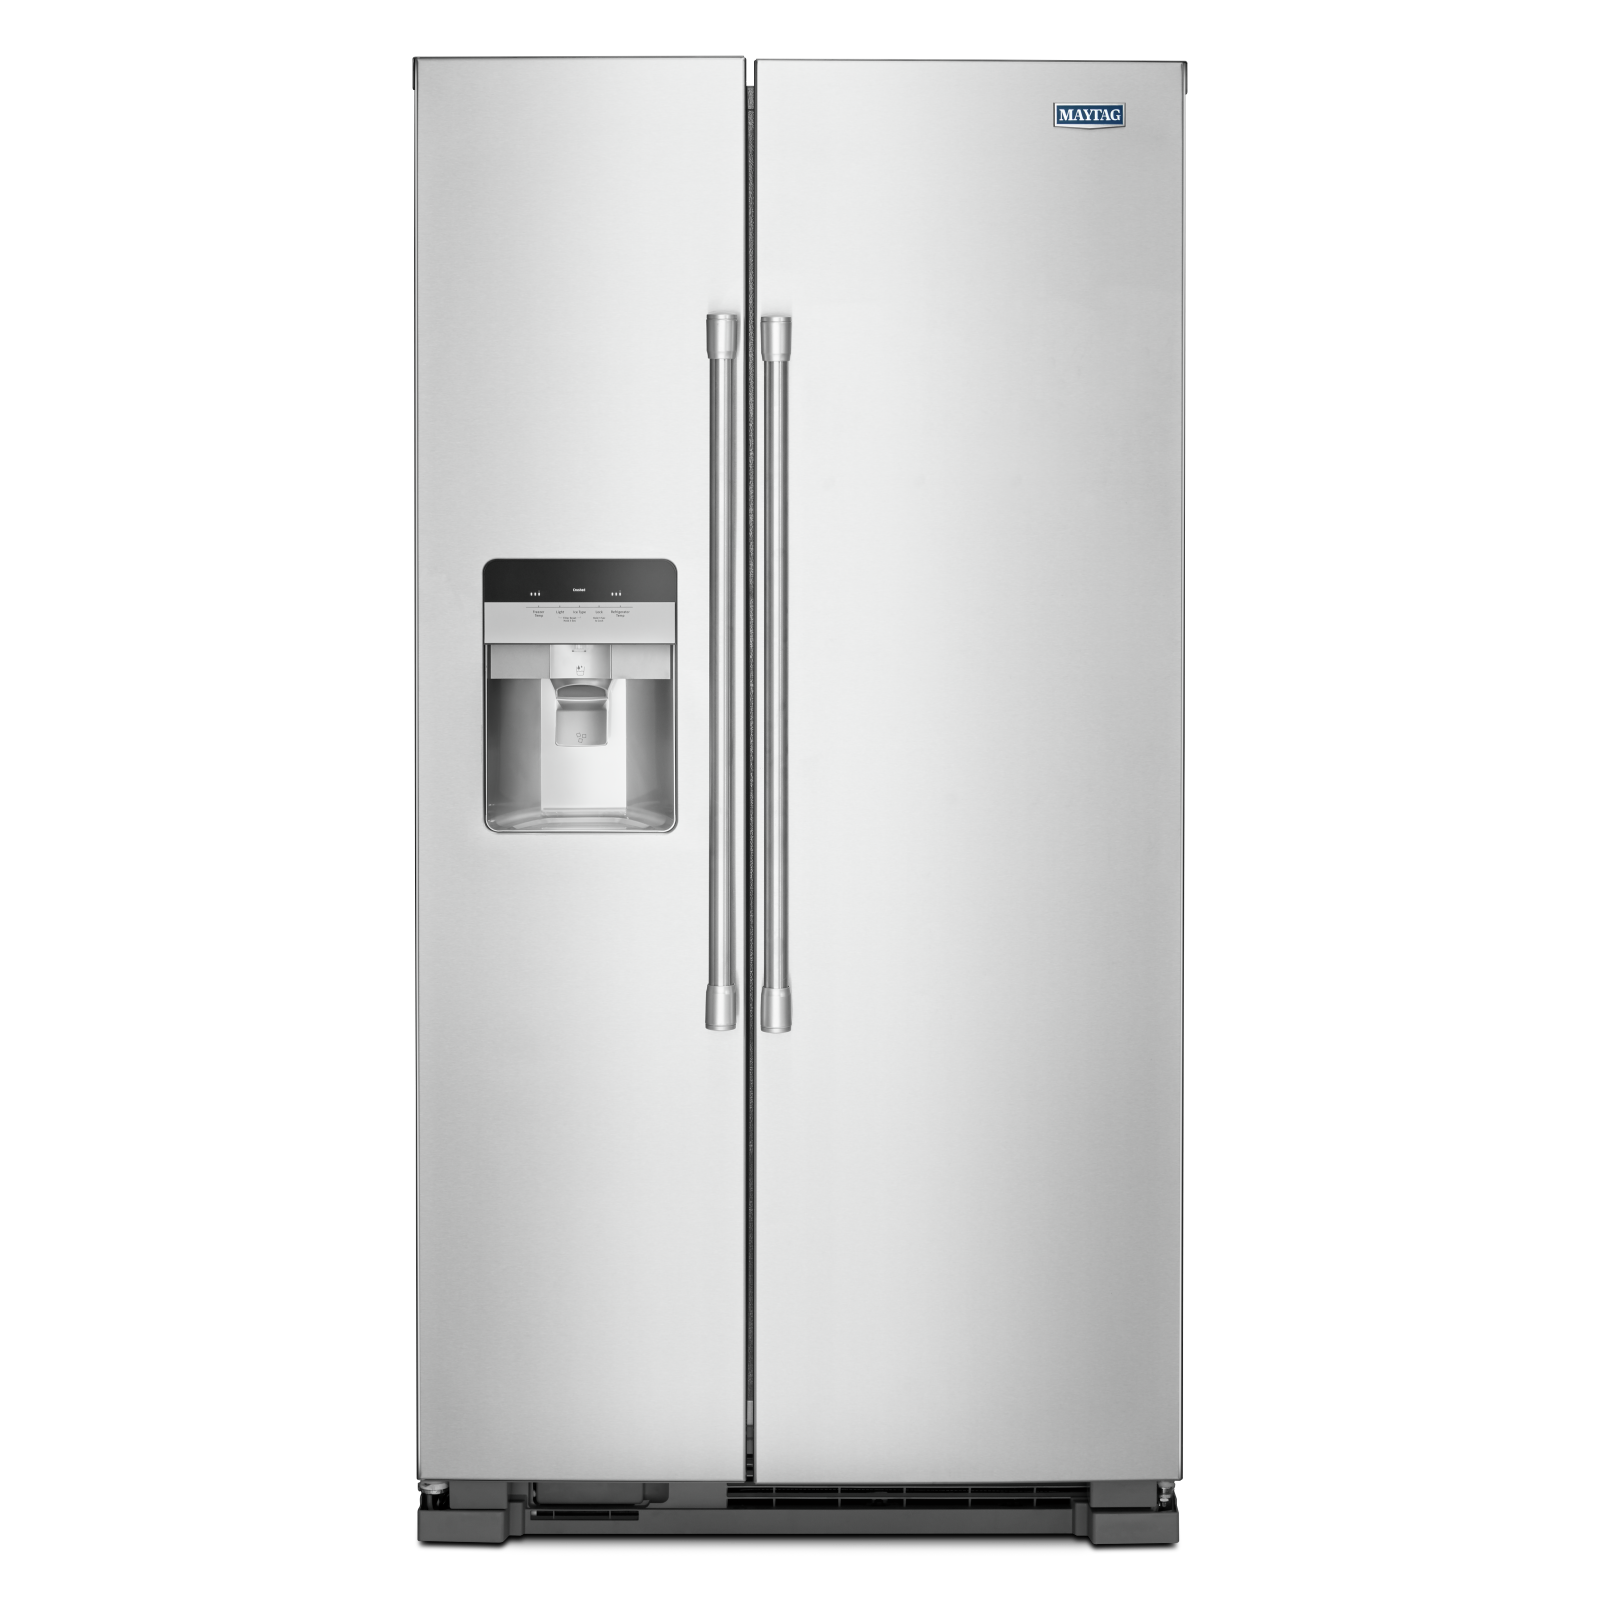 Maytag - 35.875 Inch 24.5 cu. ft Side by Side Refrigerator in Stainless - MSS25C4MGZ